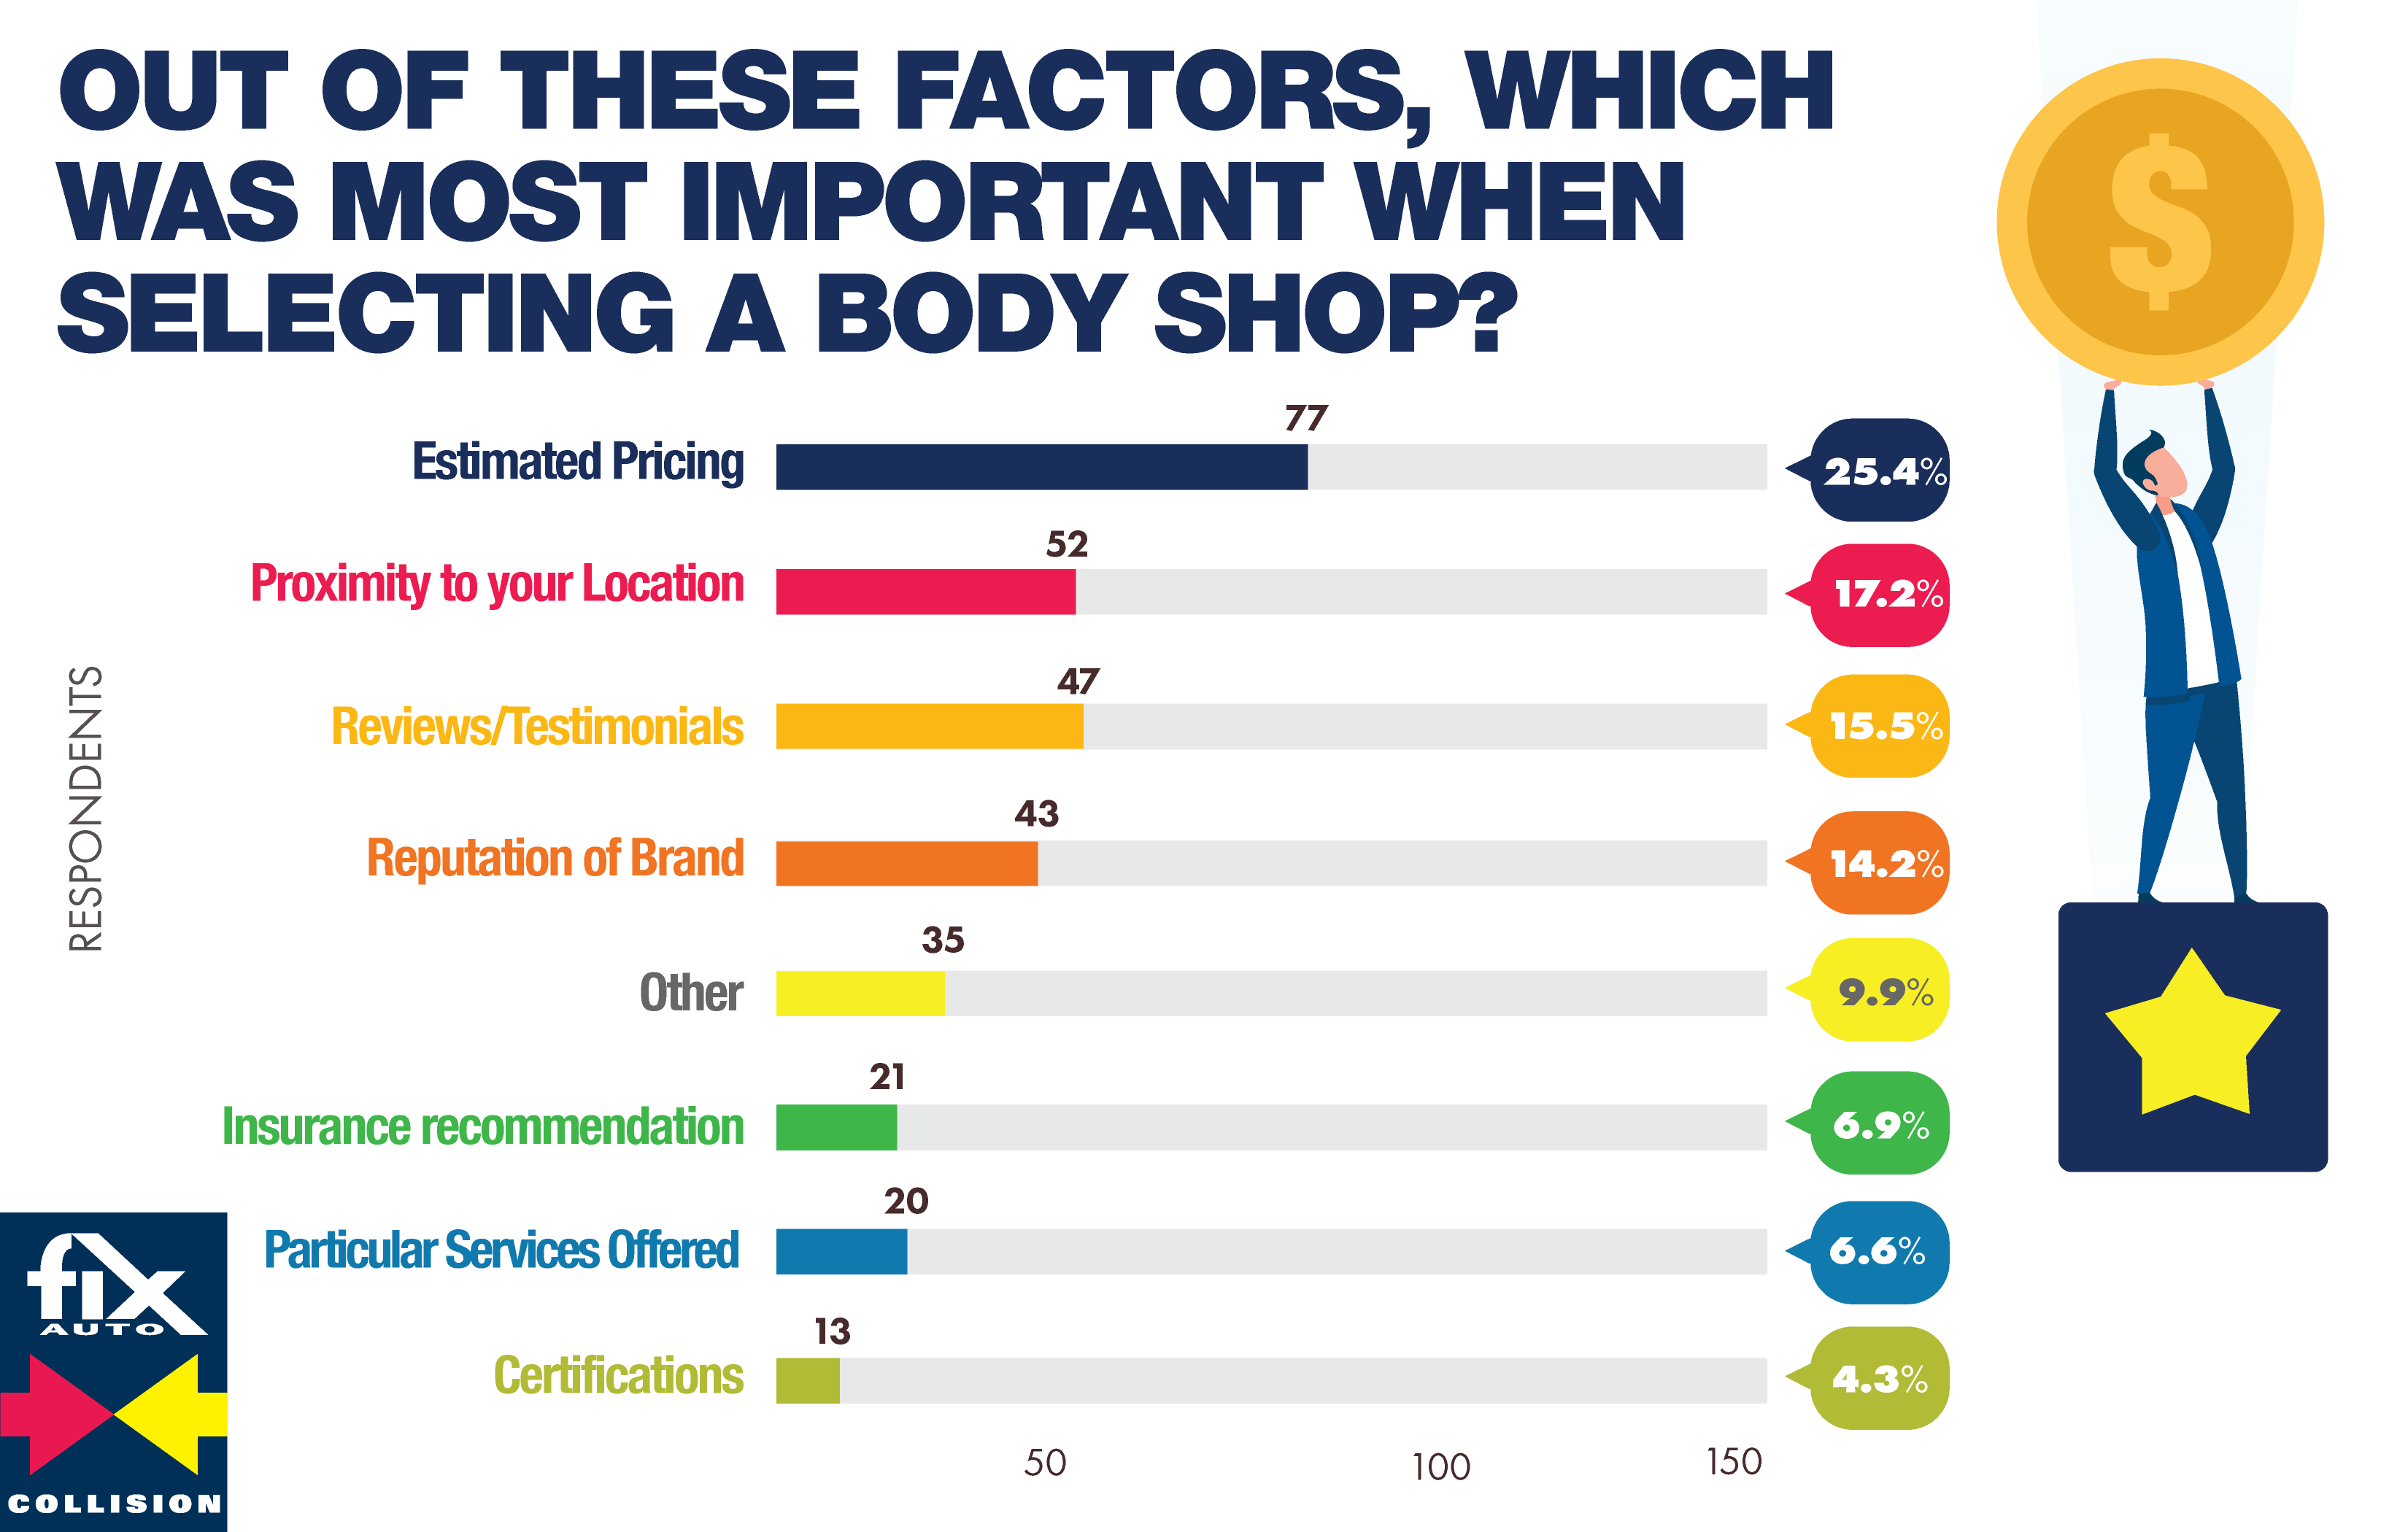 out of these factors, which was the most important when selecting a body shop